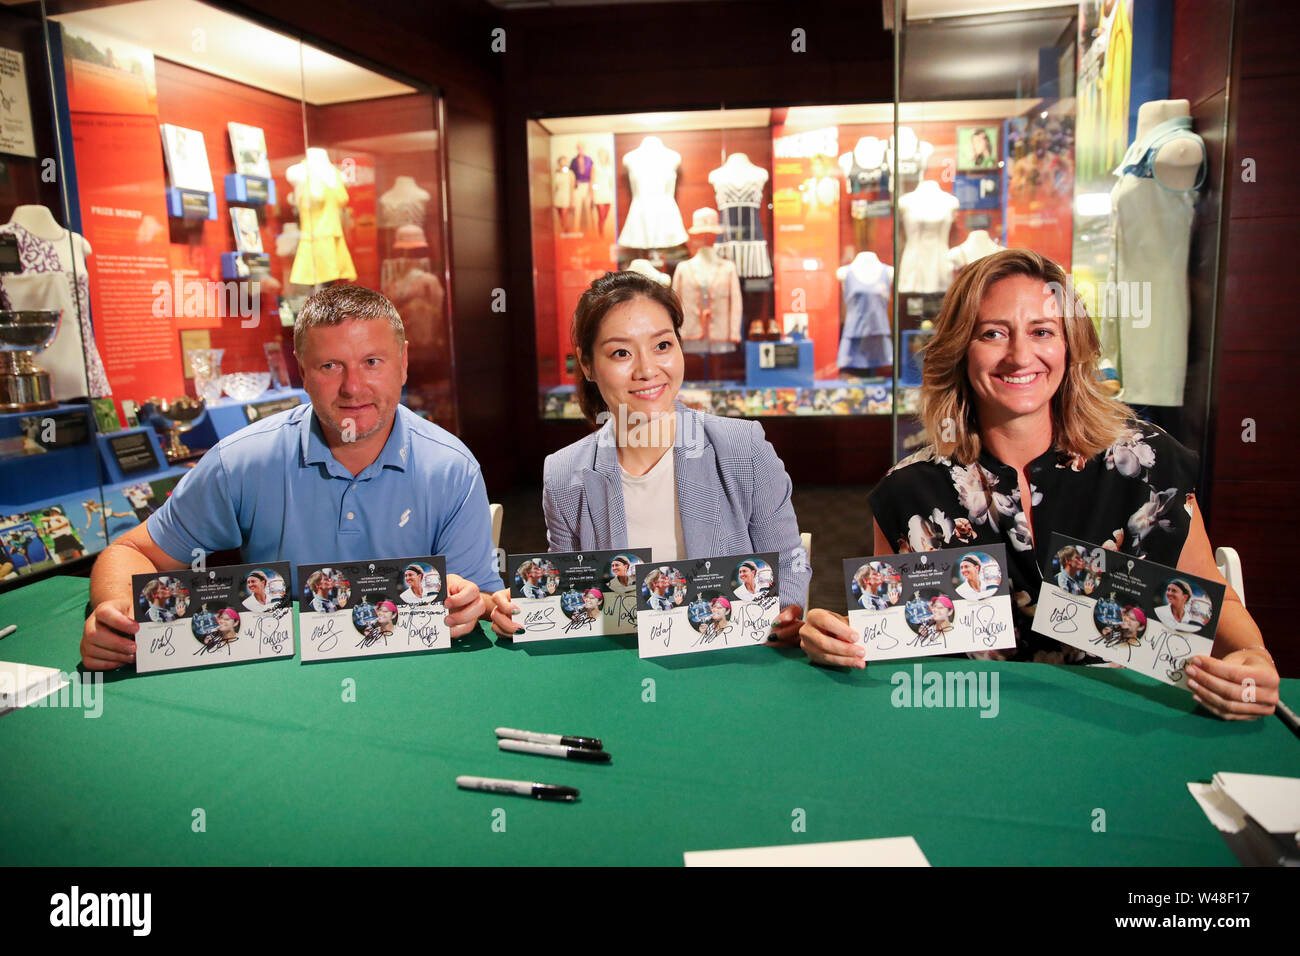 Rhode Island, USA. 20th July, 2019. Mary Pierce (R) of France, Li Na (C) of China and Yevgeny Kafelnikov of Russia show their signed autographs before the induction ceremony of the International Tennis Hall of Fame in Newport of Rhode Island, the United States, July 20, 2019. Credit: Wang Ying/Xinhua/Alamy Live News Stock Photo